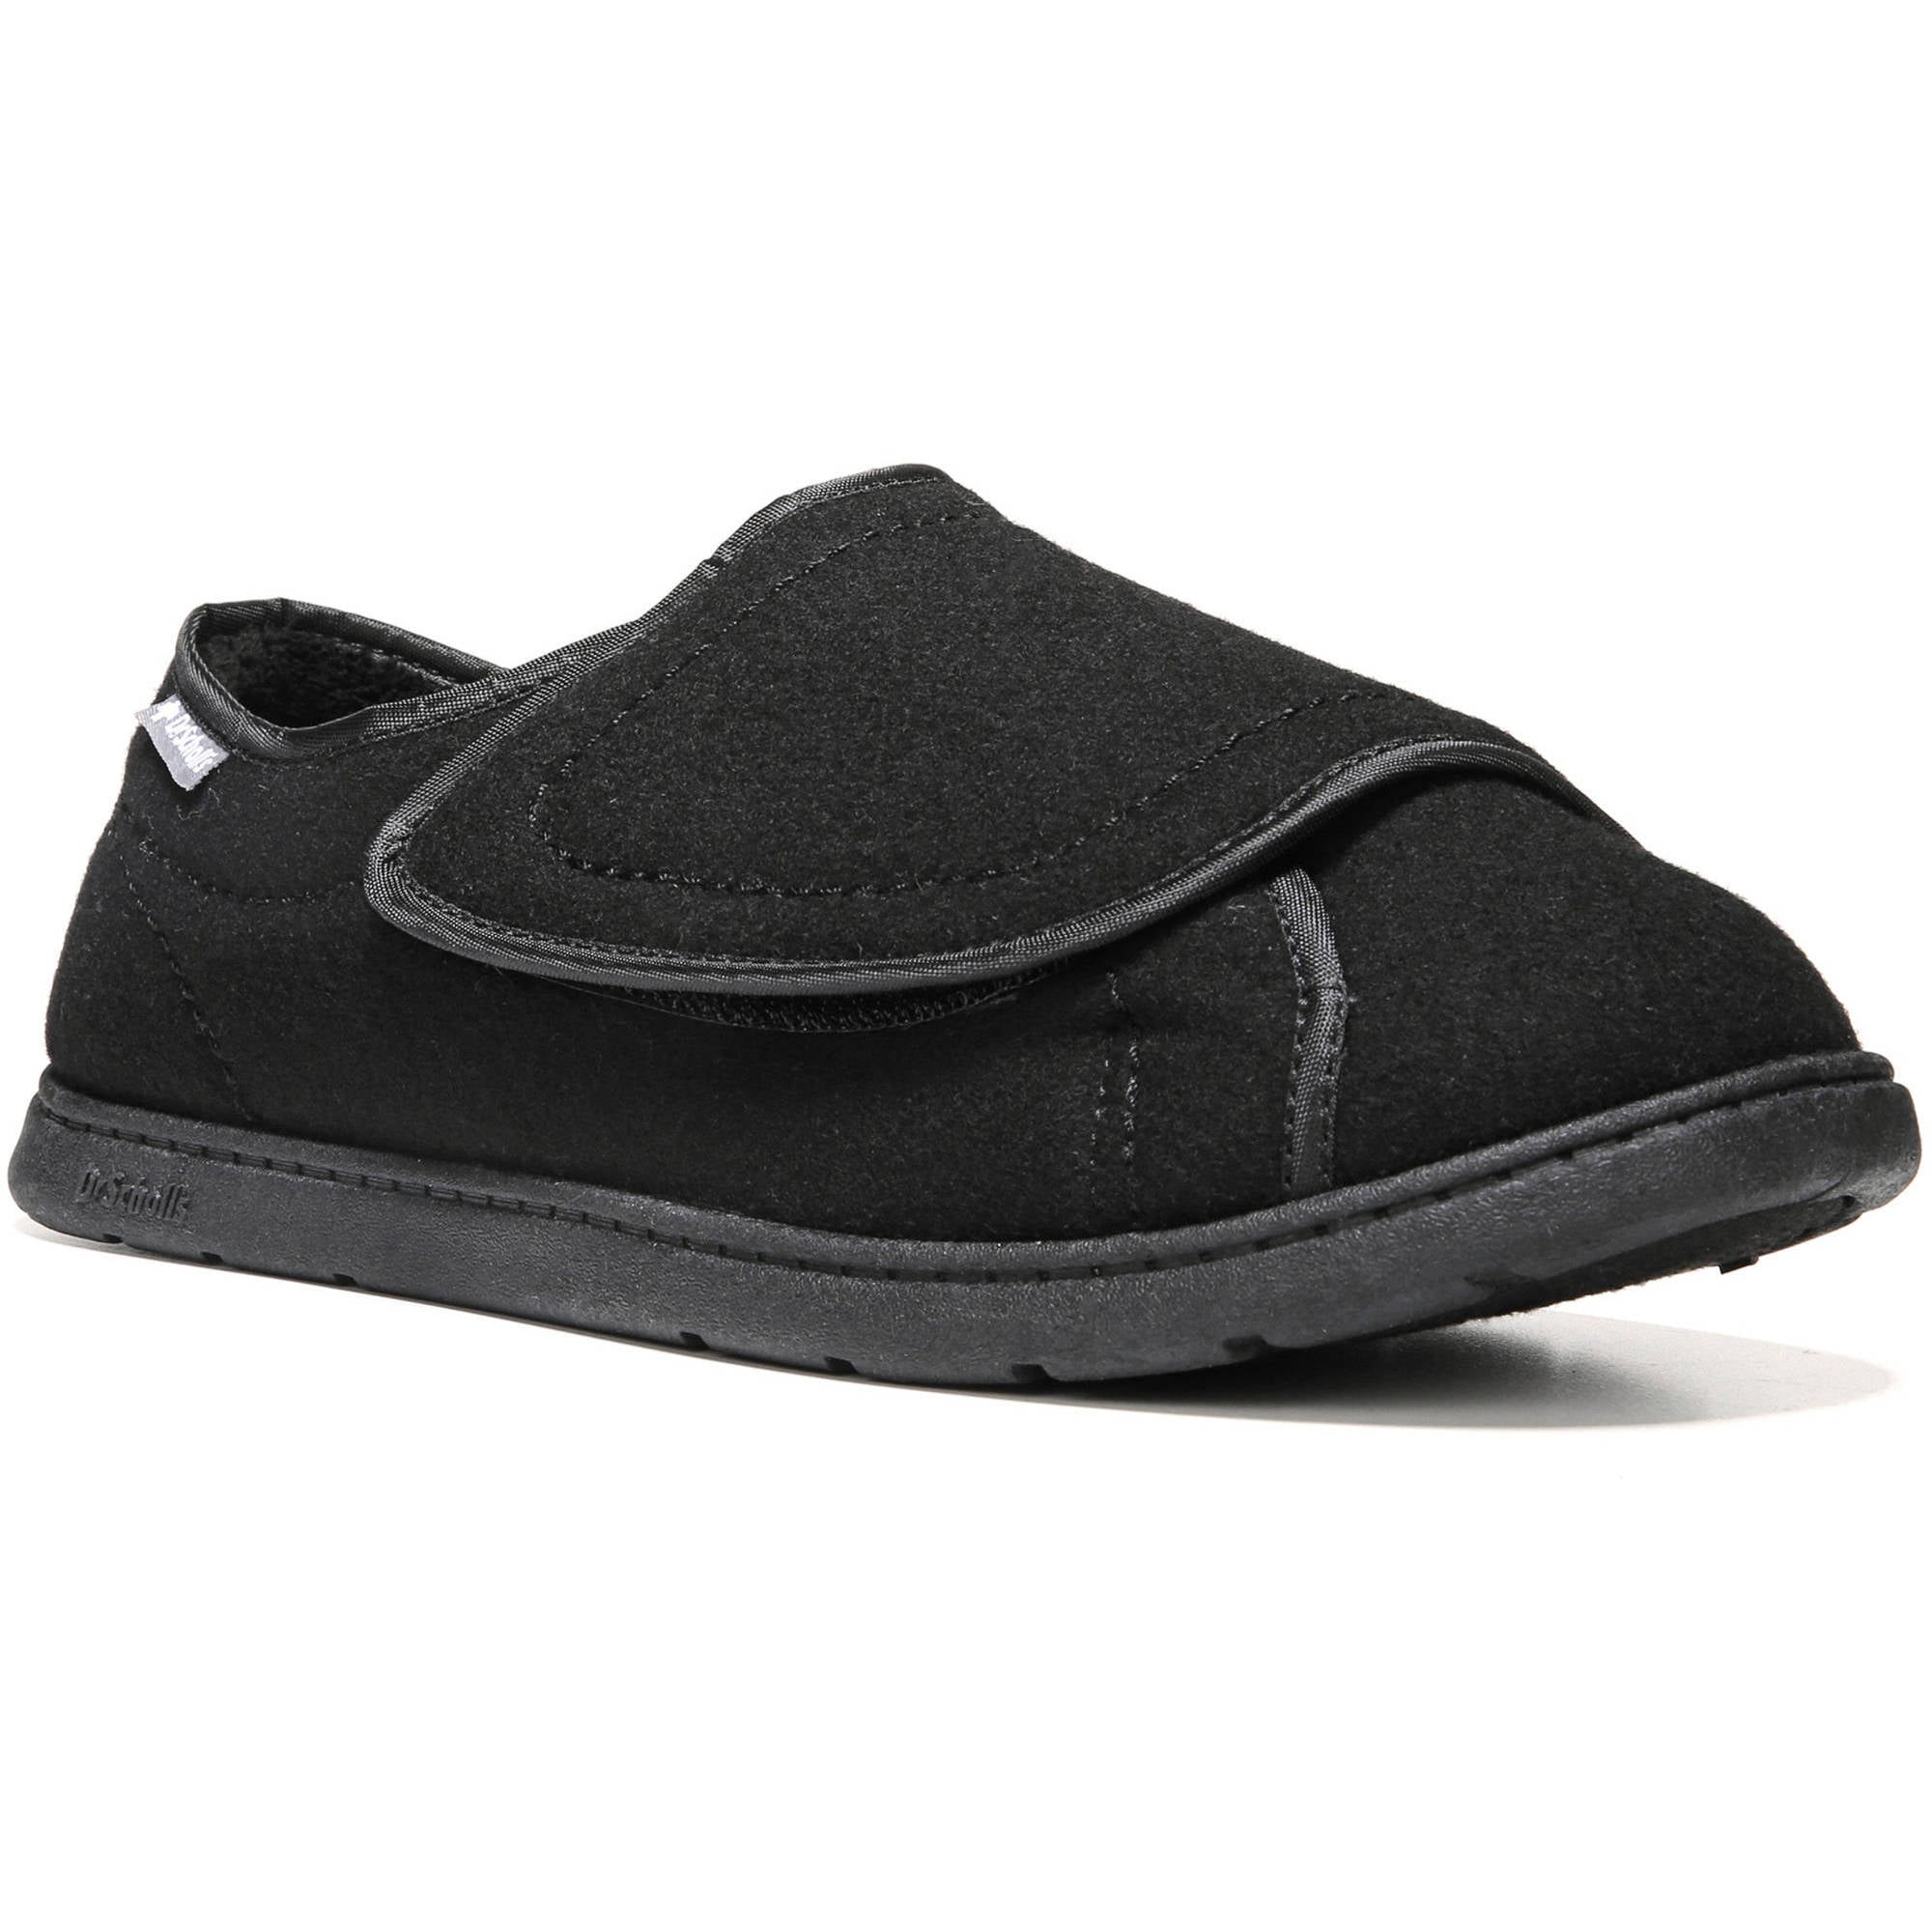 Dr. Scholl's Shoes - Dr. Scholls Women's Flannery Therapeutic Slipper ...